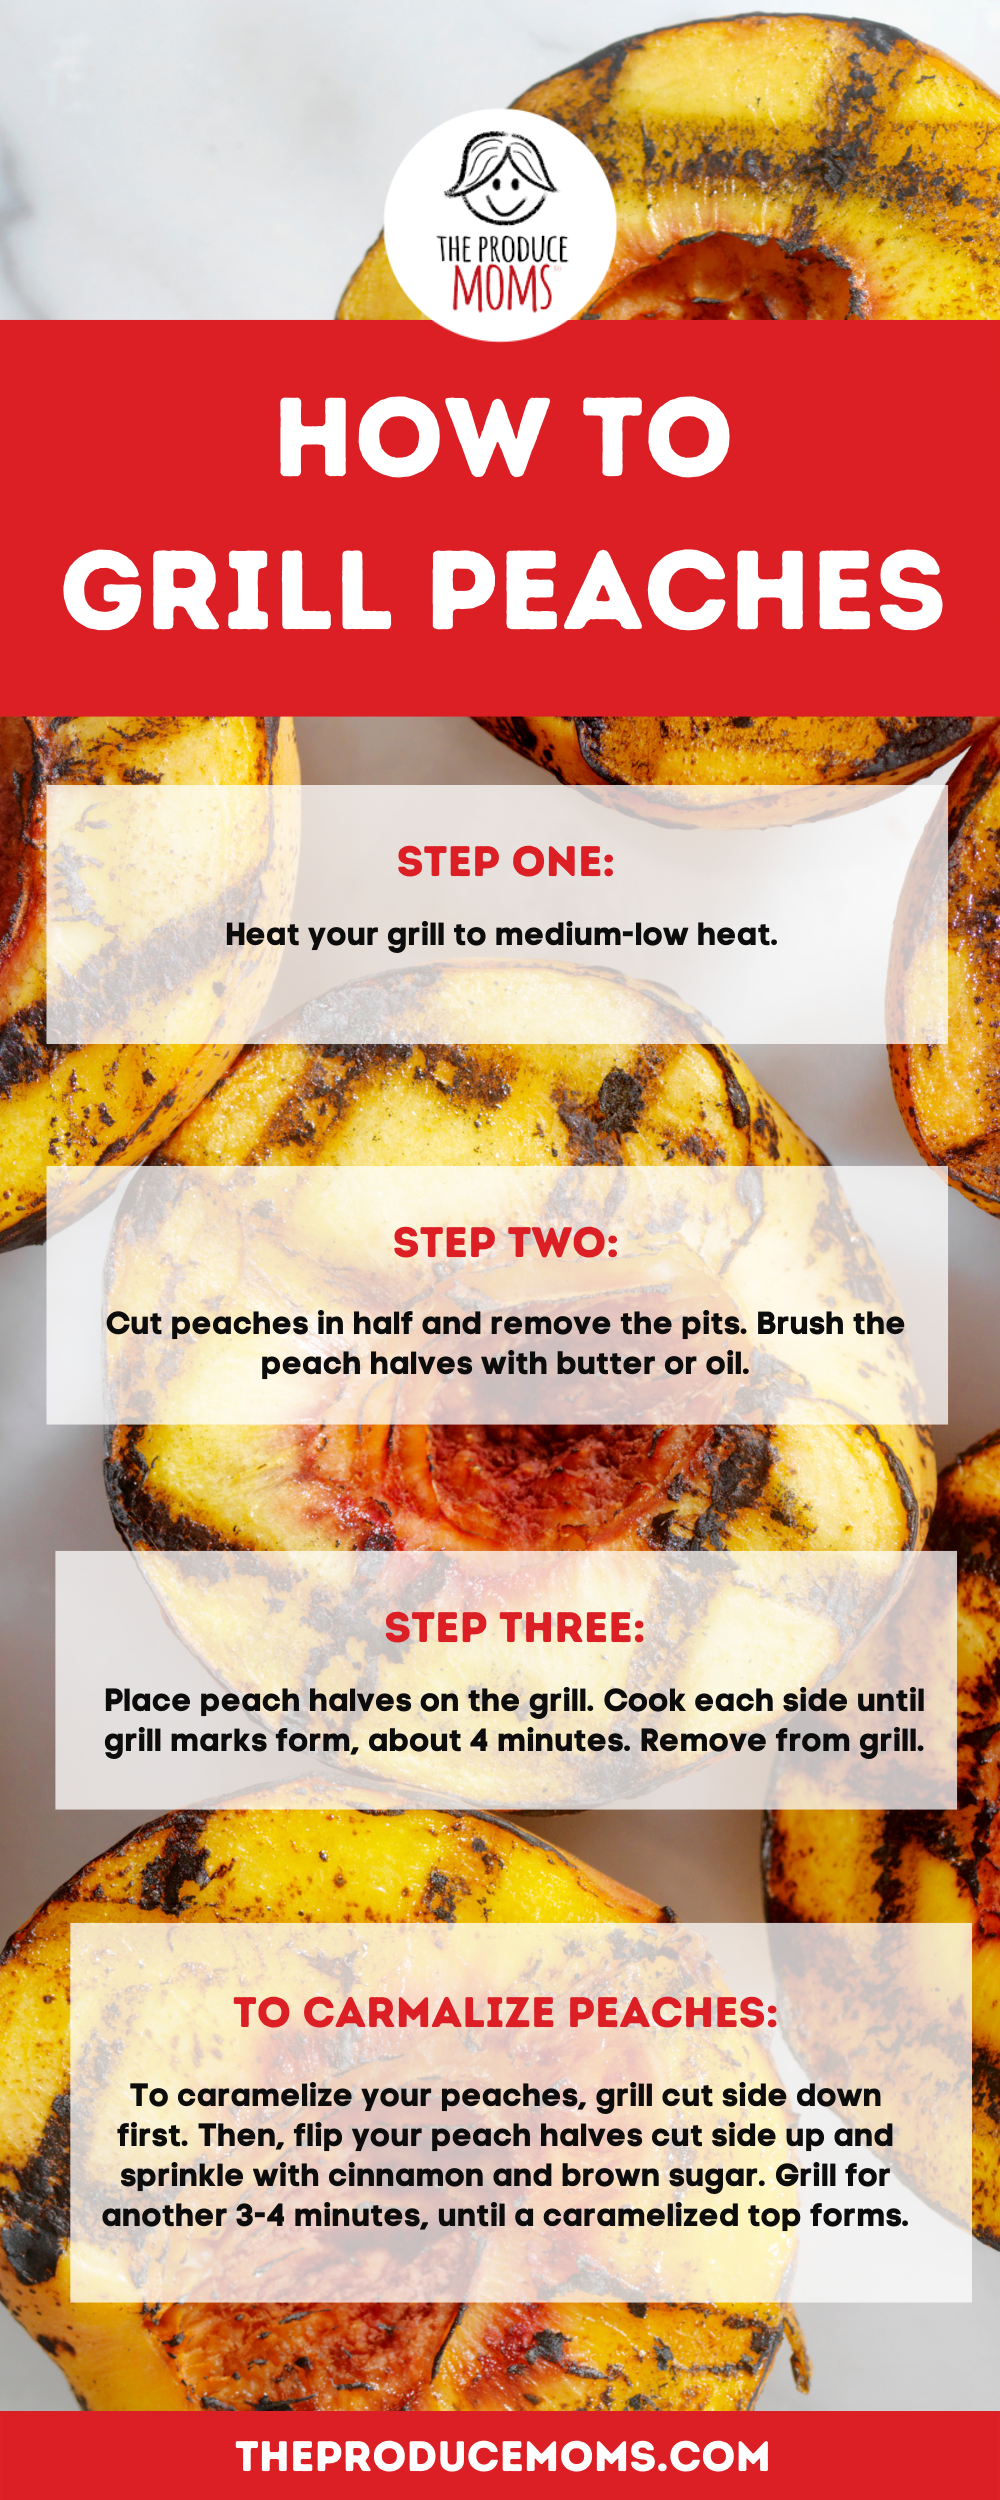 How to Grill Peaches Infographic